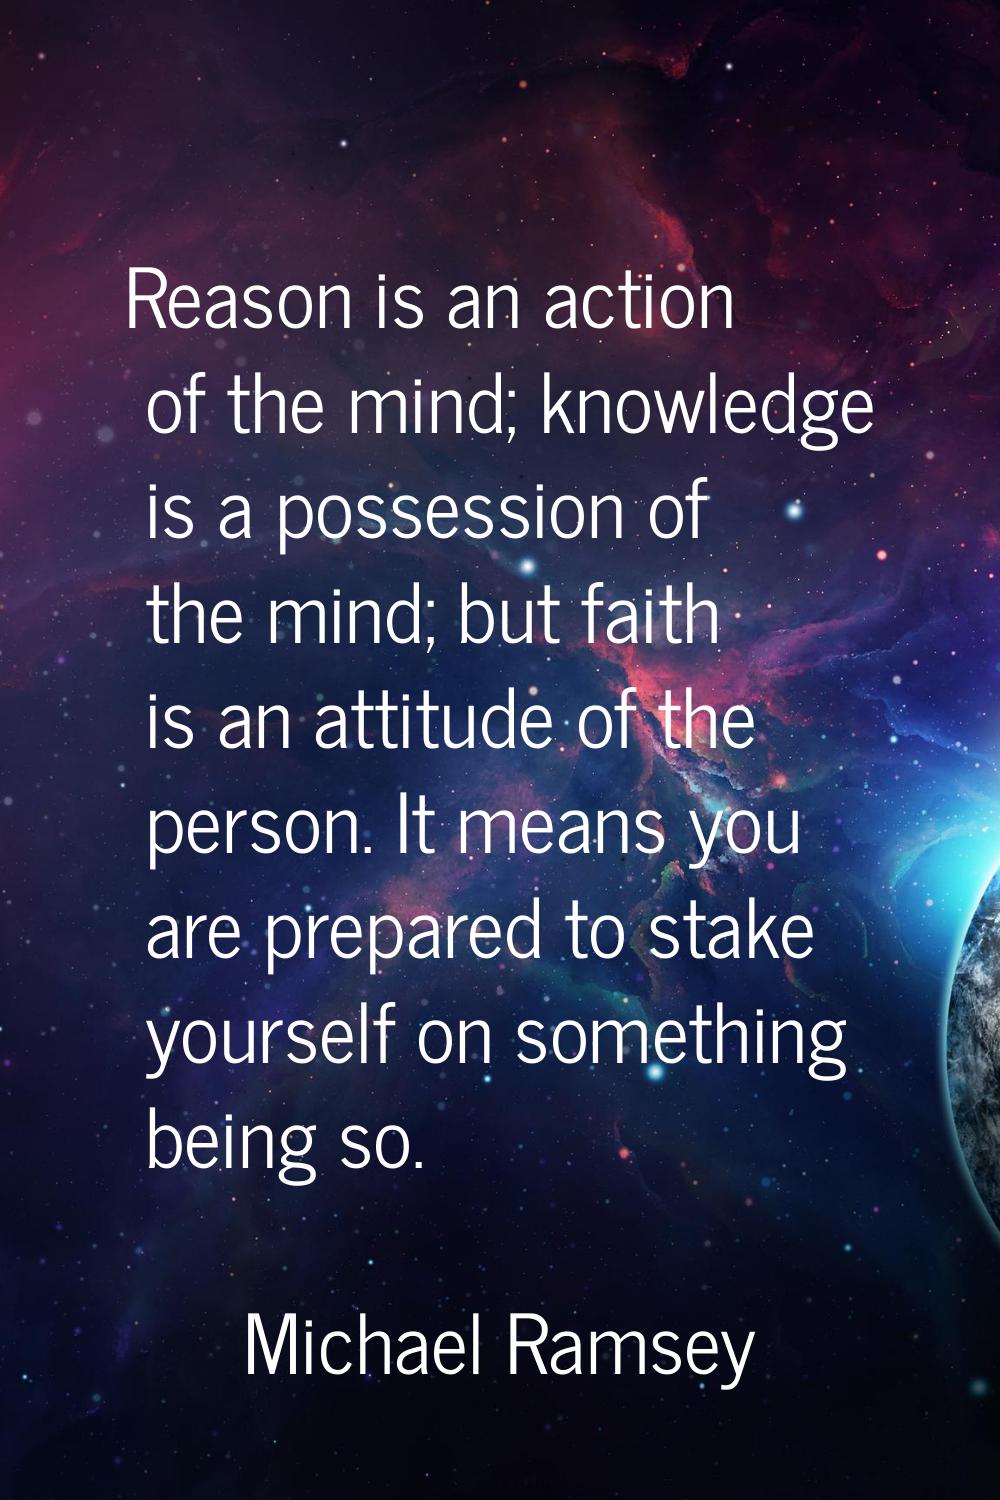 Reason is an action of the mind; knowledge is a possession of the mind; but faith is an attitude of